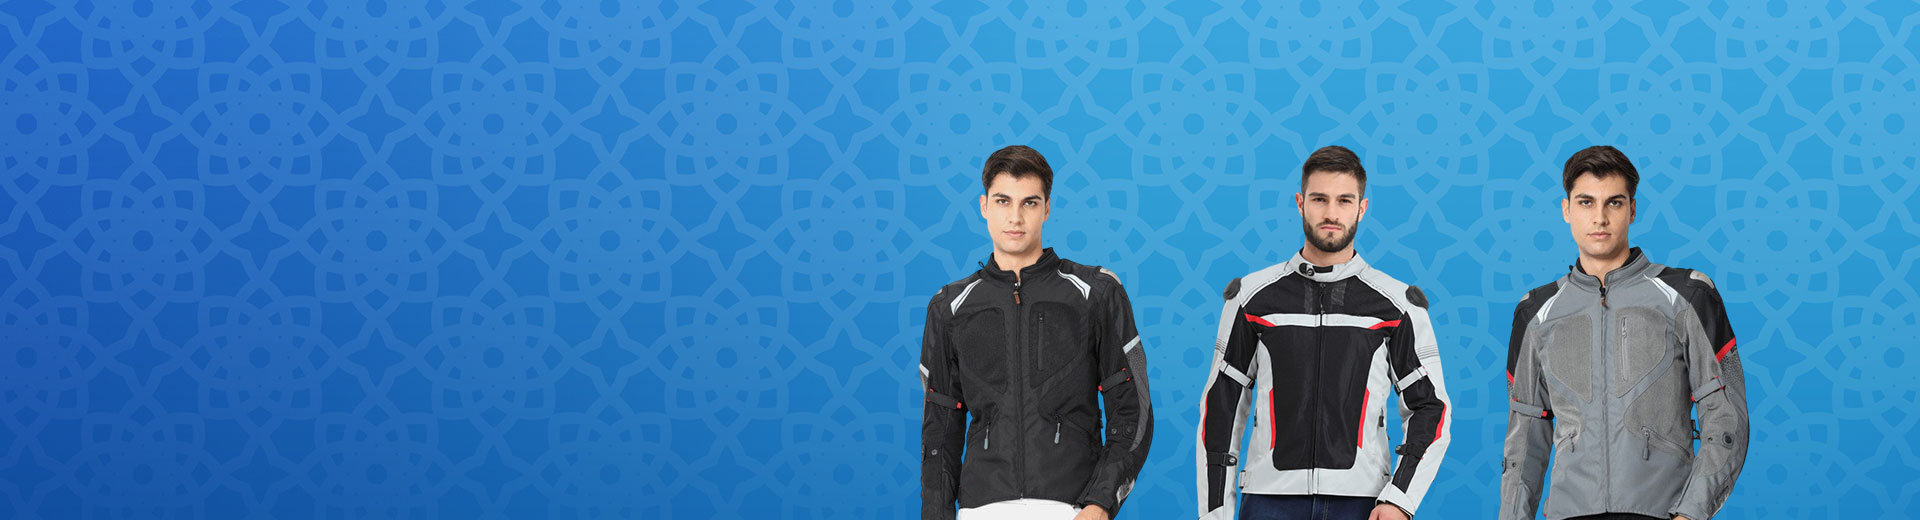 Textile Jackets Manufacturers in Chelyabinsk